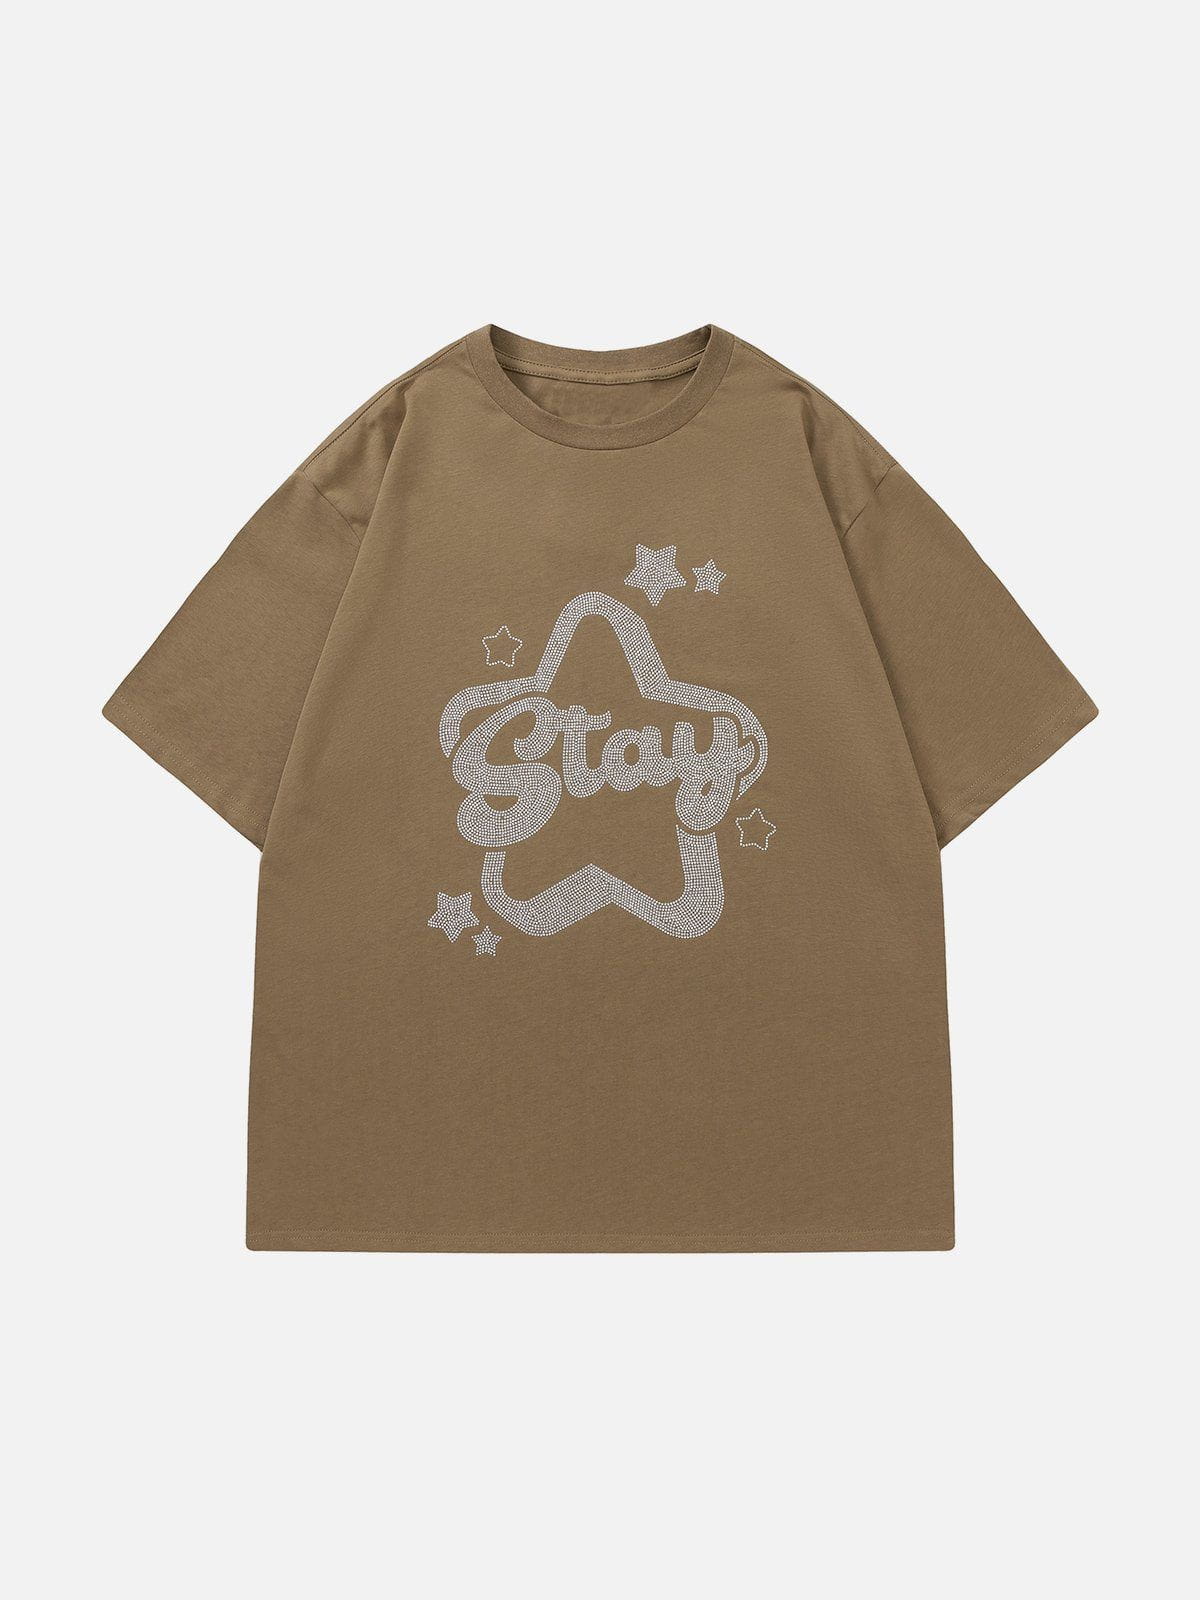 Sneakerland™ - Solid Color Star Print Tee